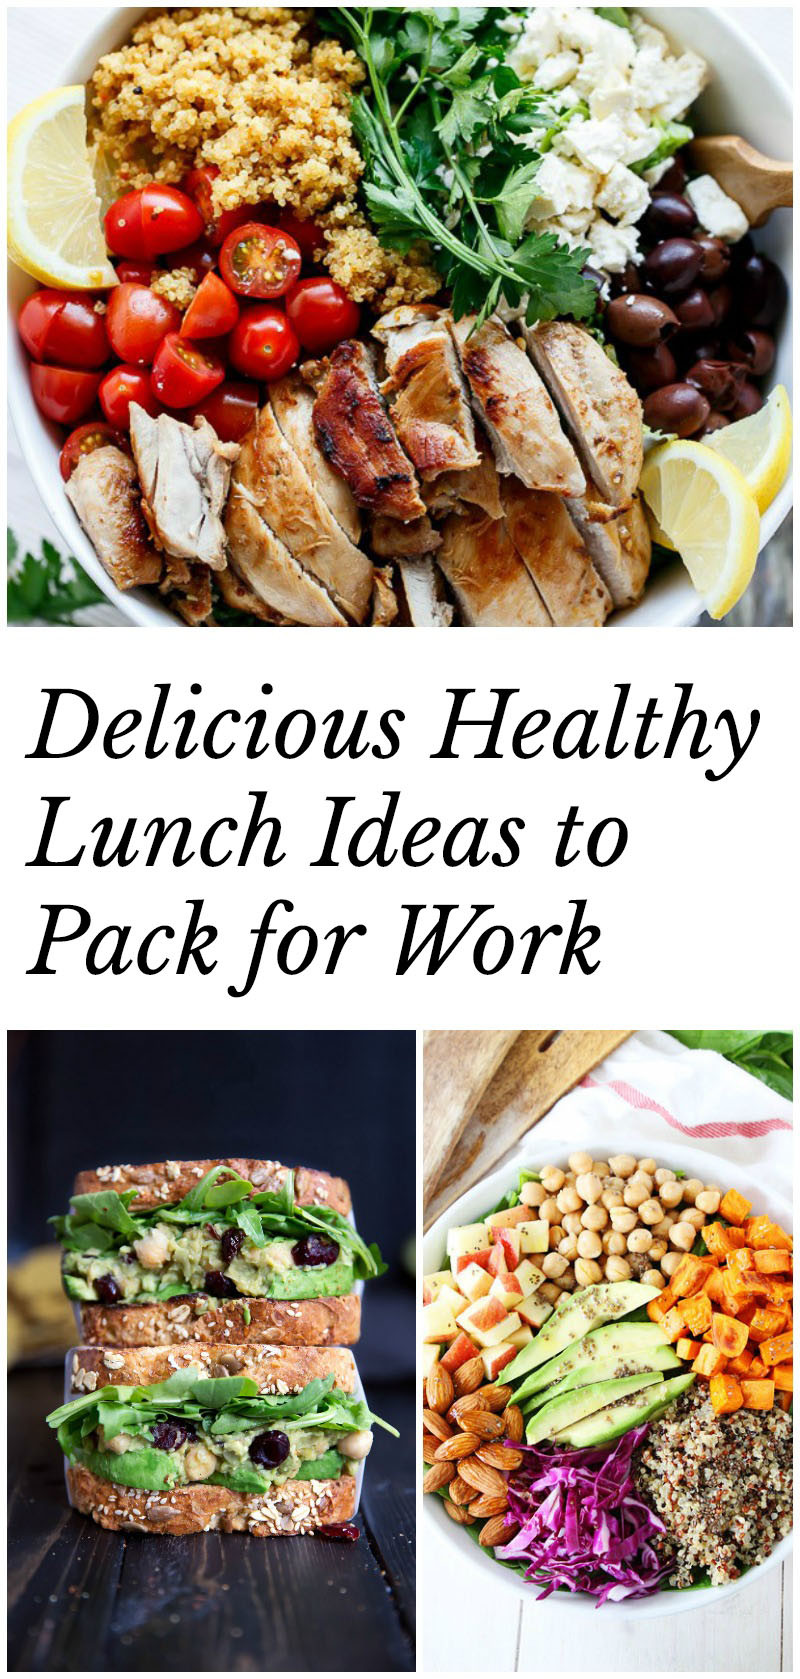 Healthy Lunches To Pack
 Healthy Lunch Ideas to Pack for Work 40 recipes